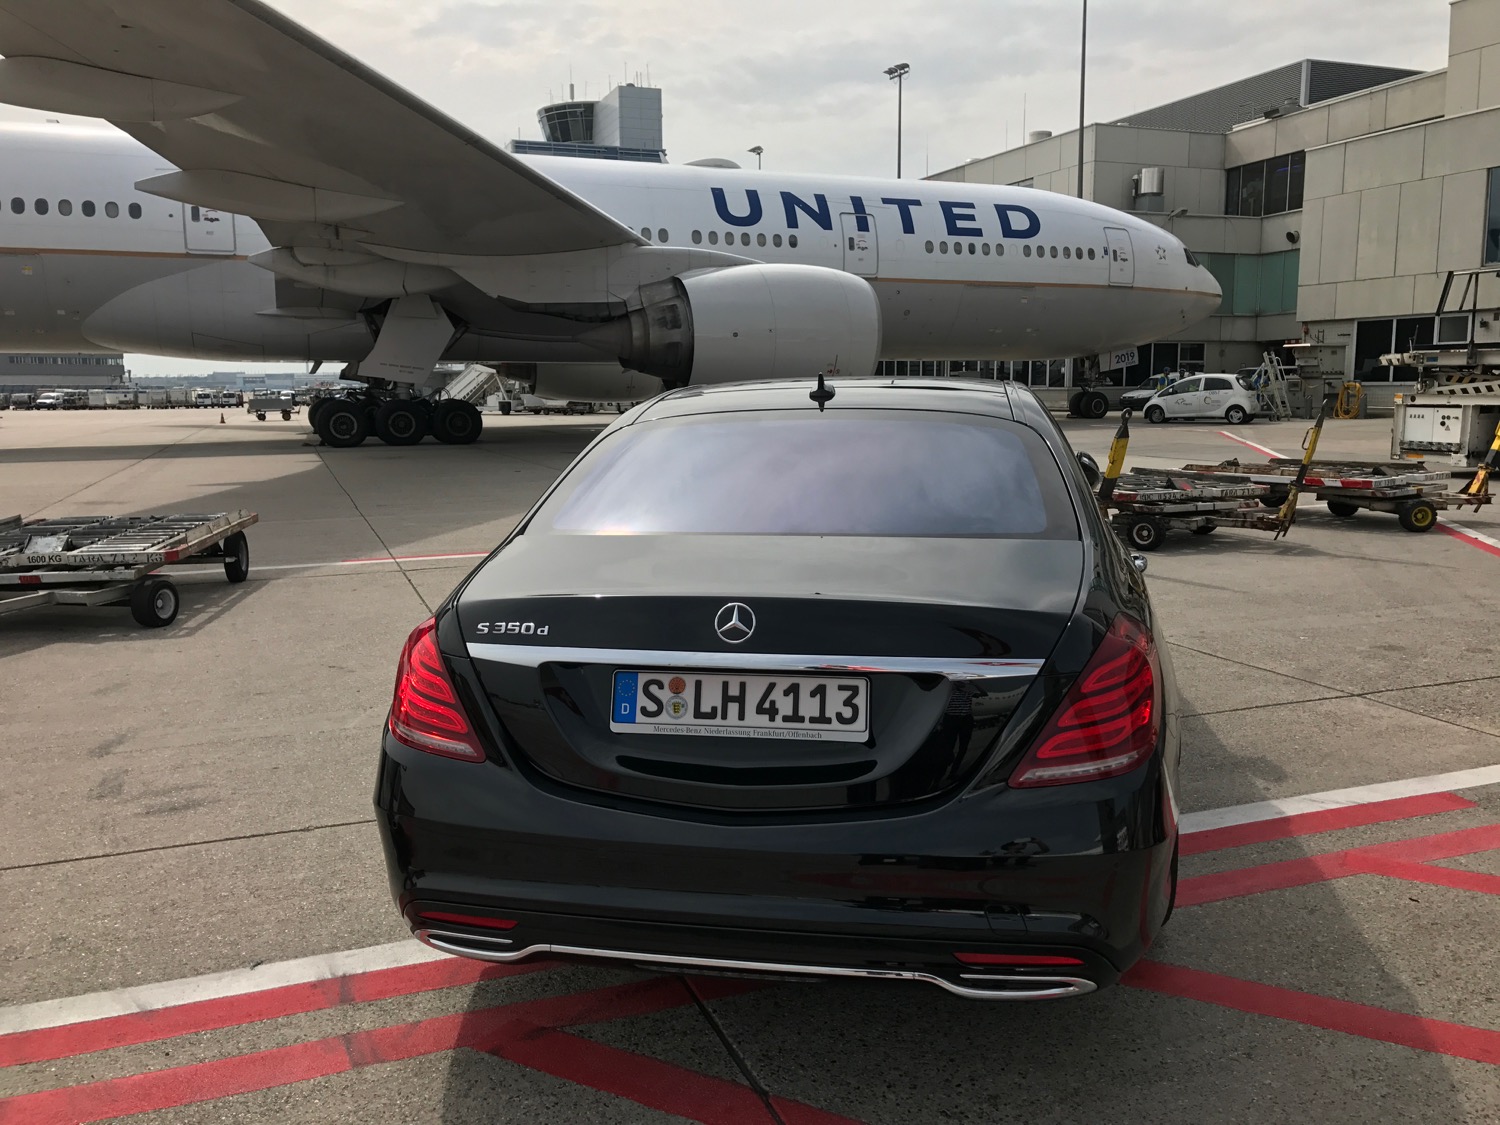 a black car parked on a tarmac next to an airplane